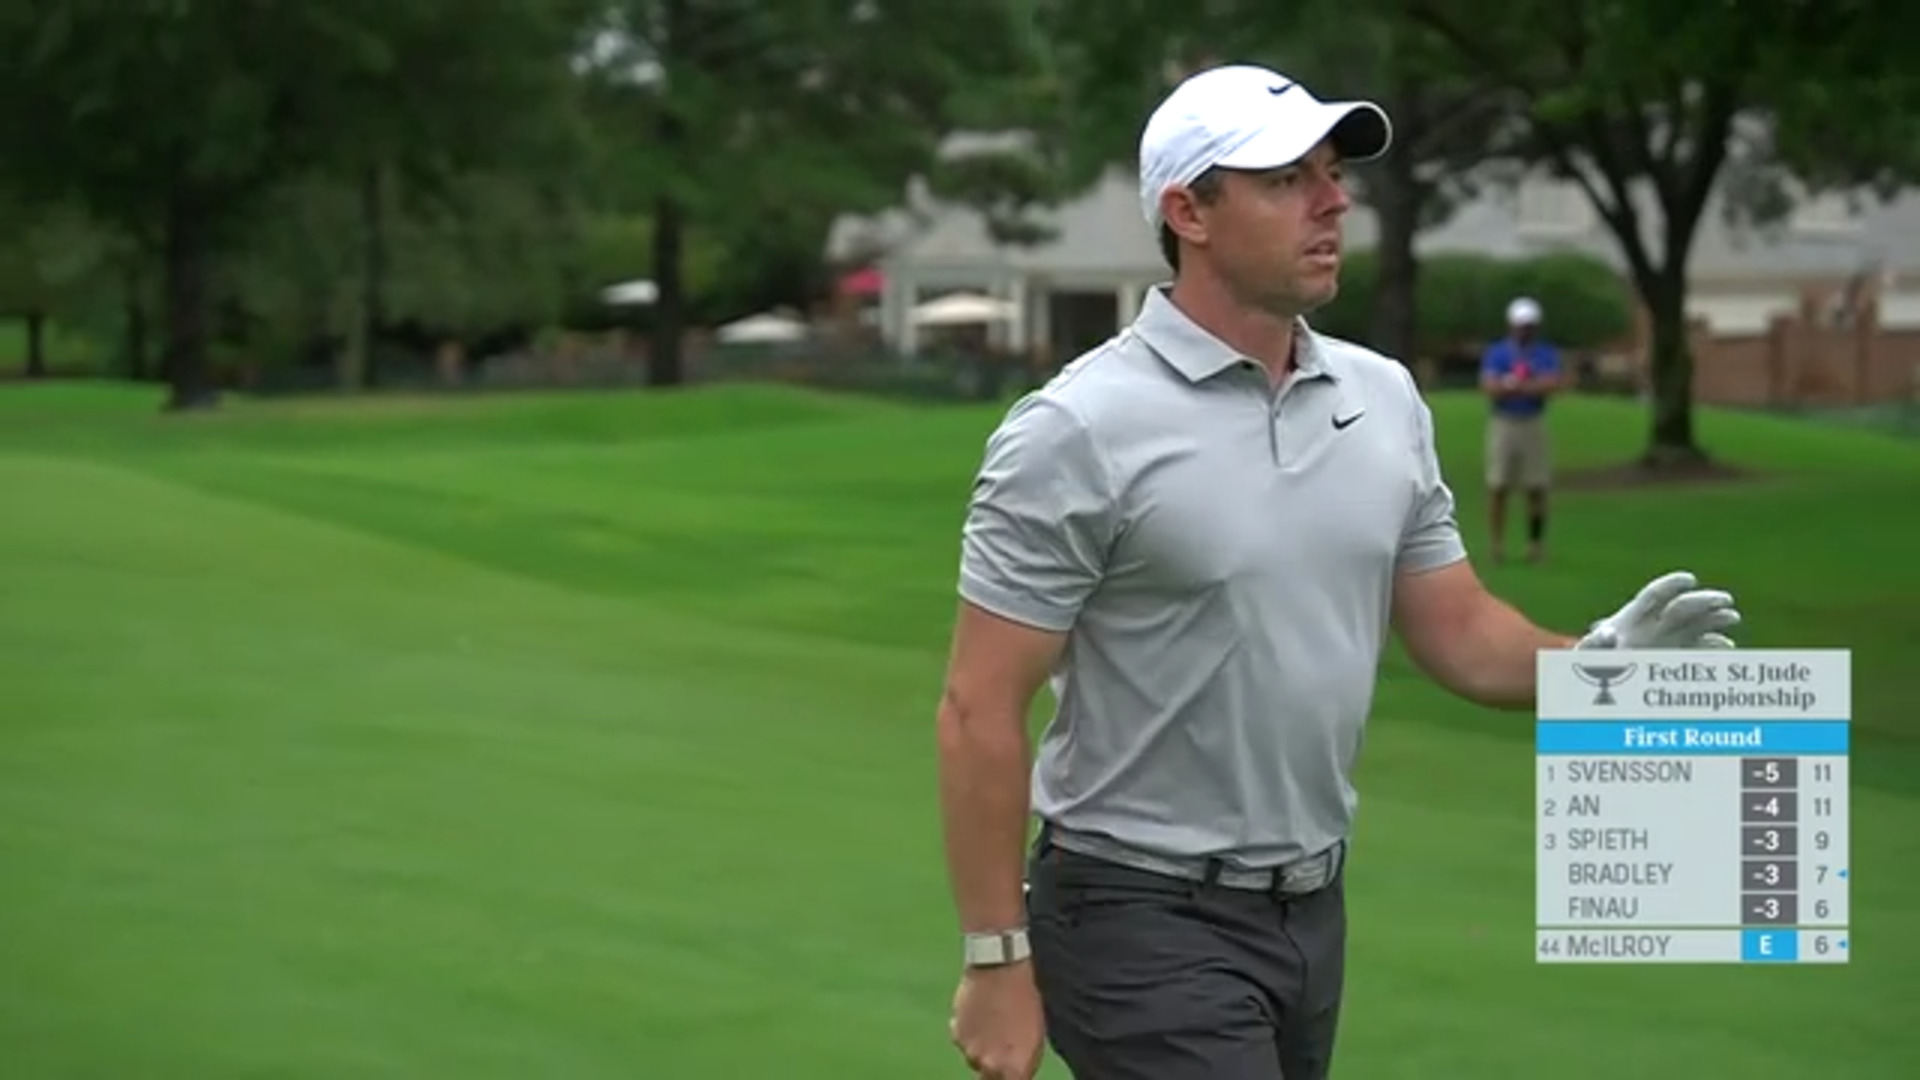 Rory McIlroy reaches in two with excellent approach yielding eagle at FedEx St